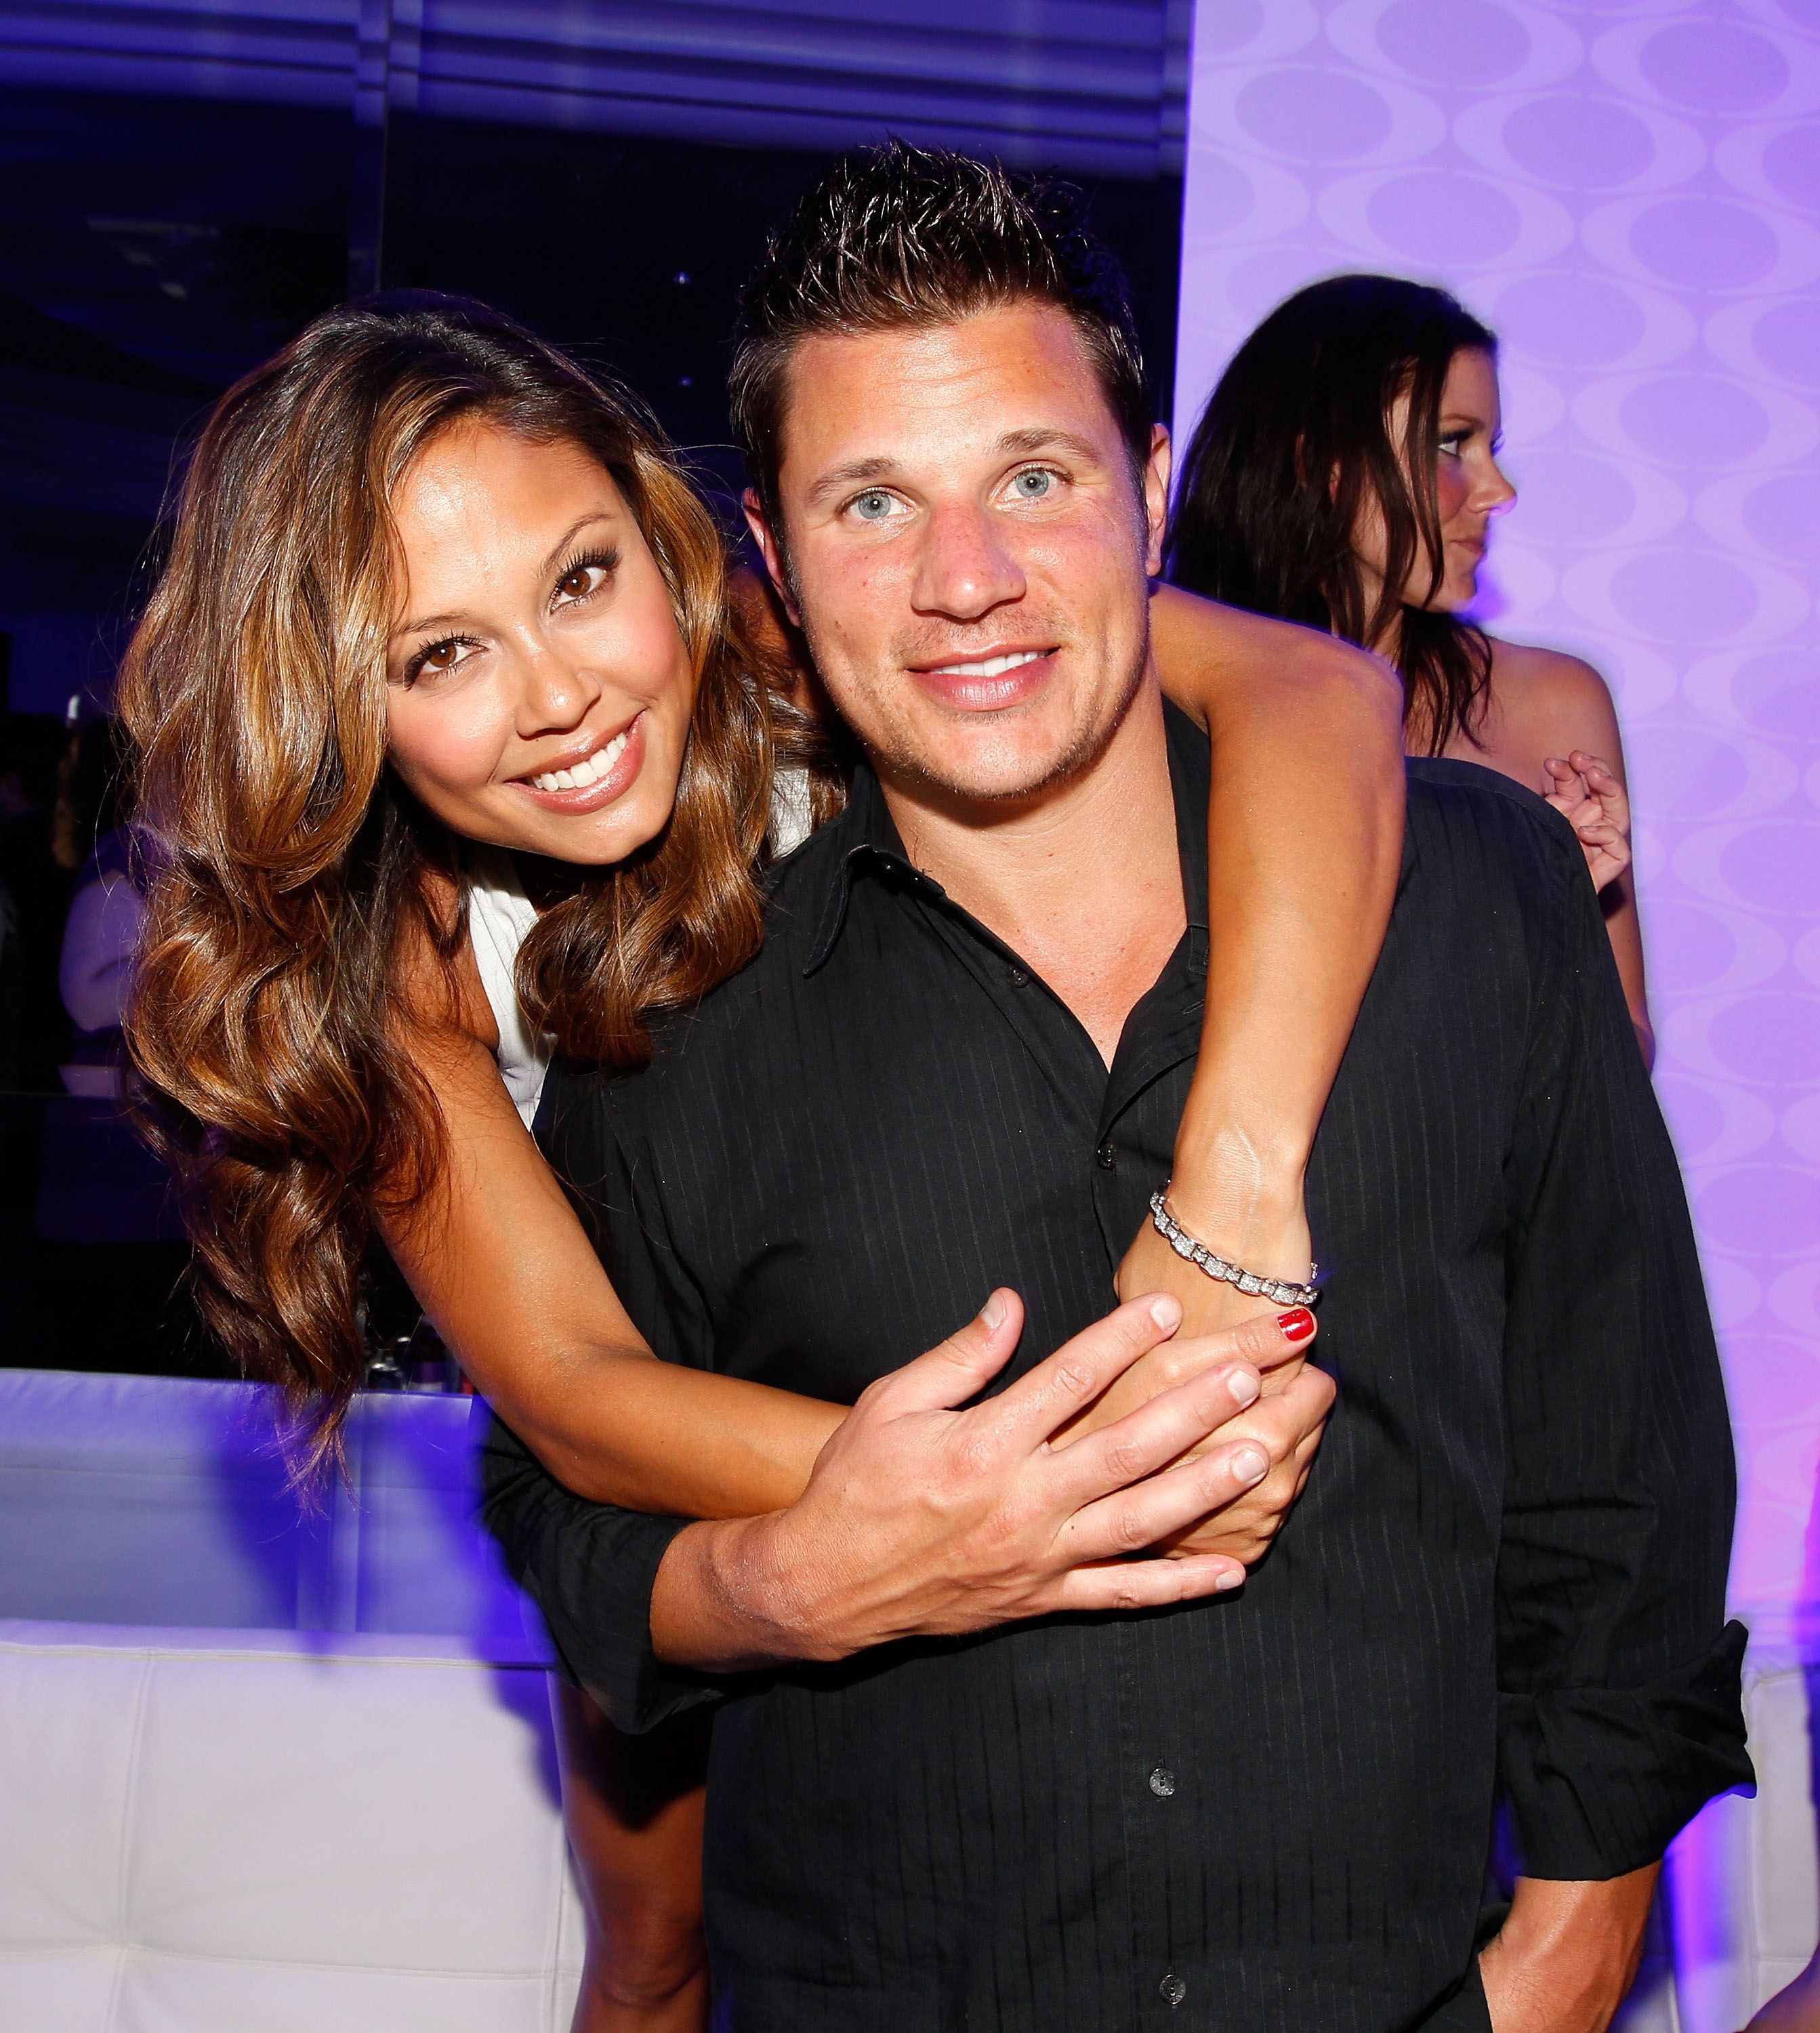 https://hips.hearstapps.com/hmg-prod/images/personality-vanessa-minnillo-and-singer-tv-personality-nick-news-photo-1631827953.jpg